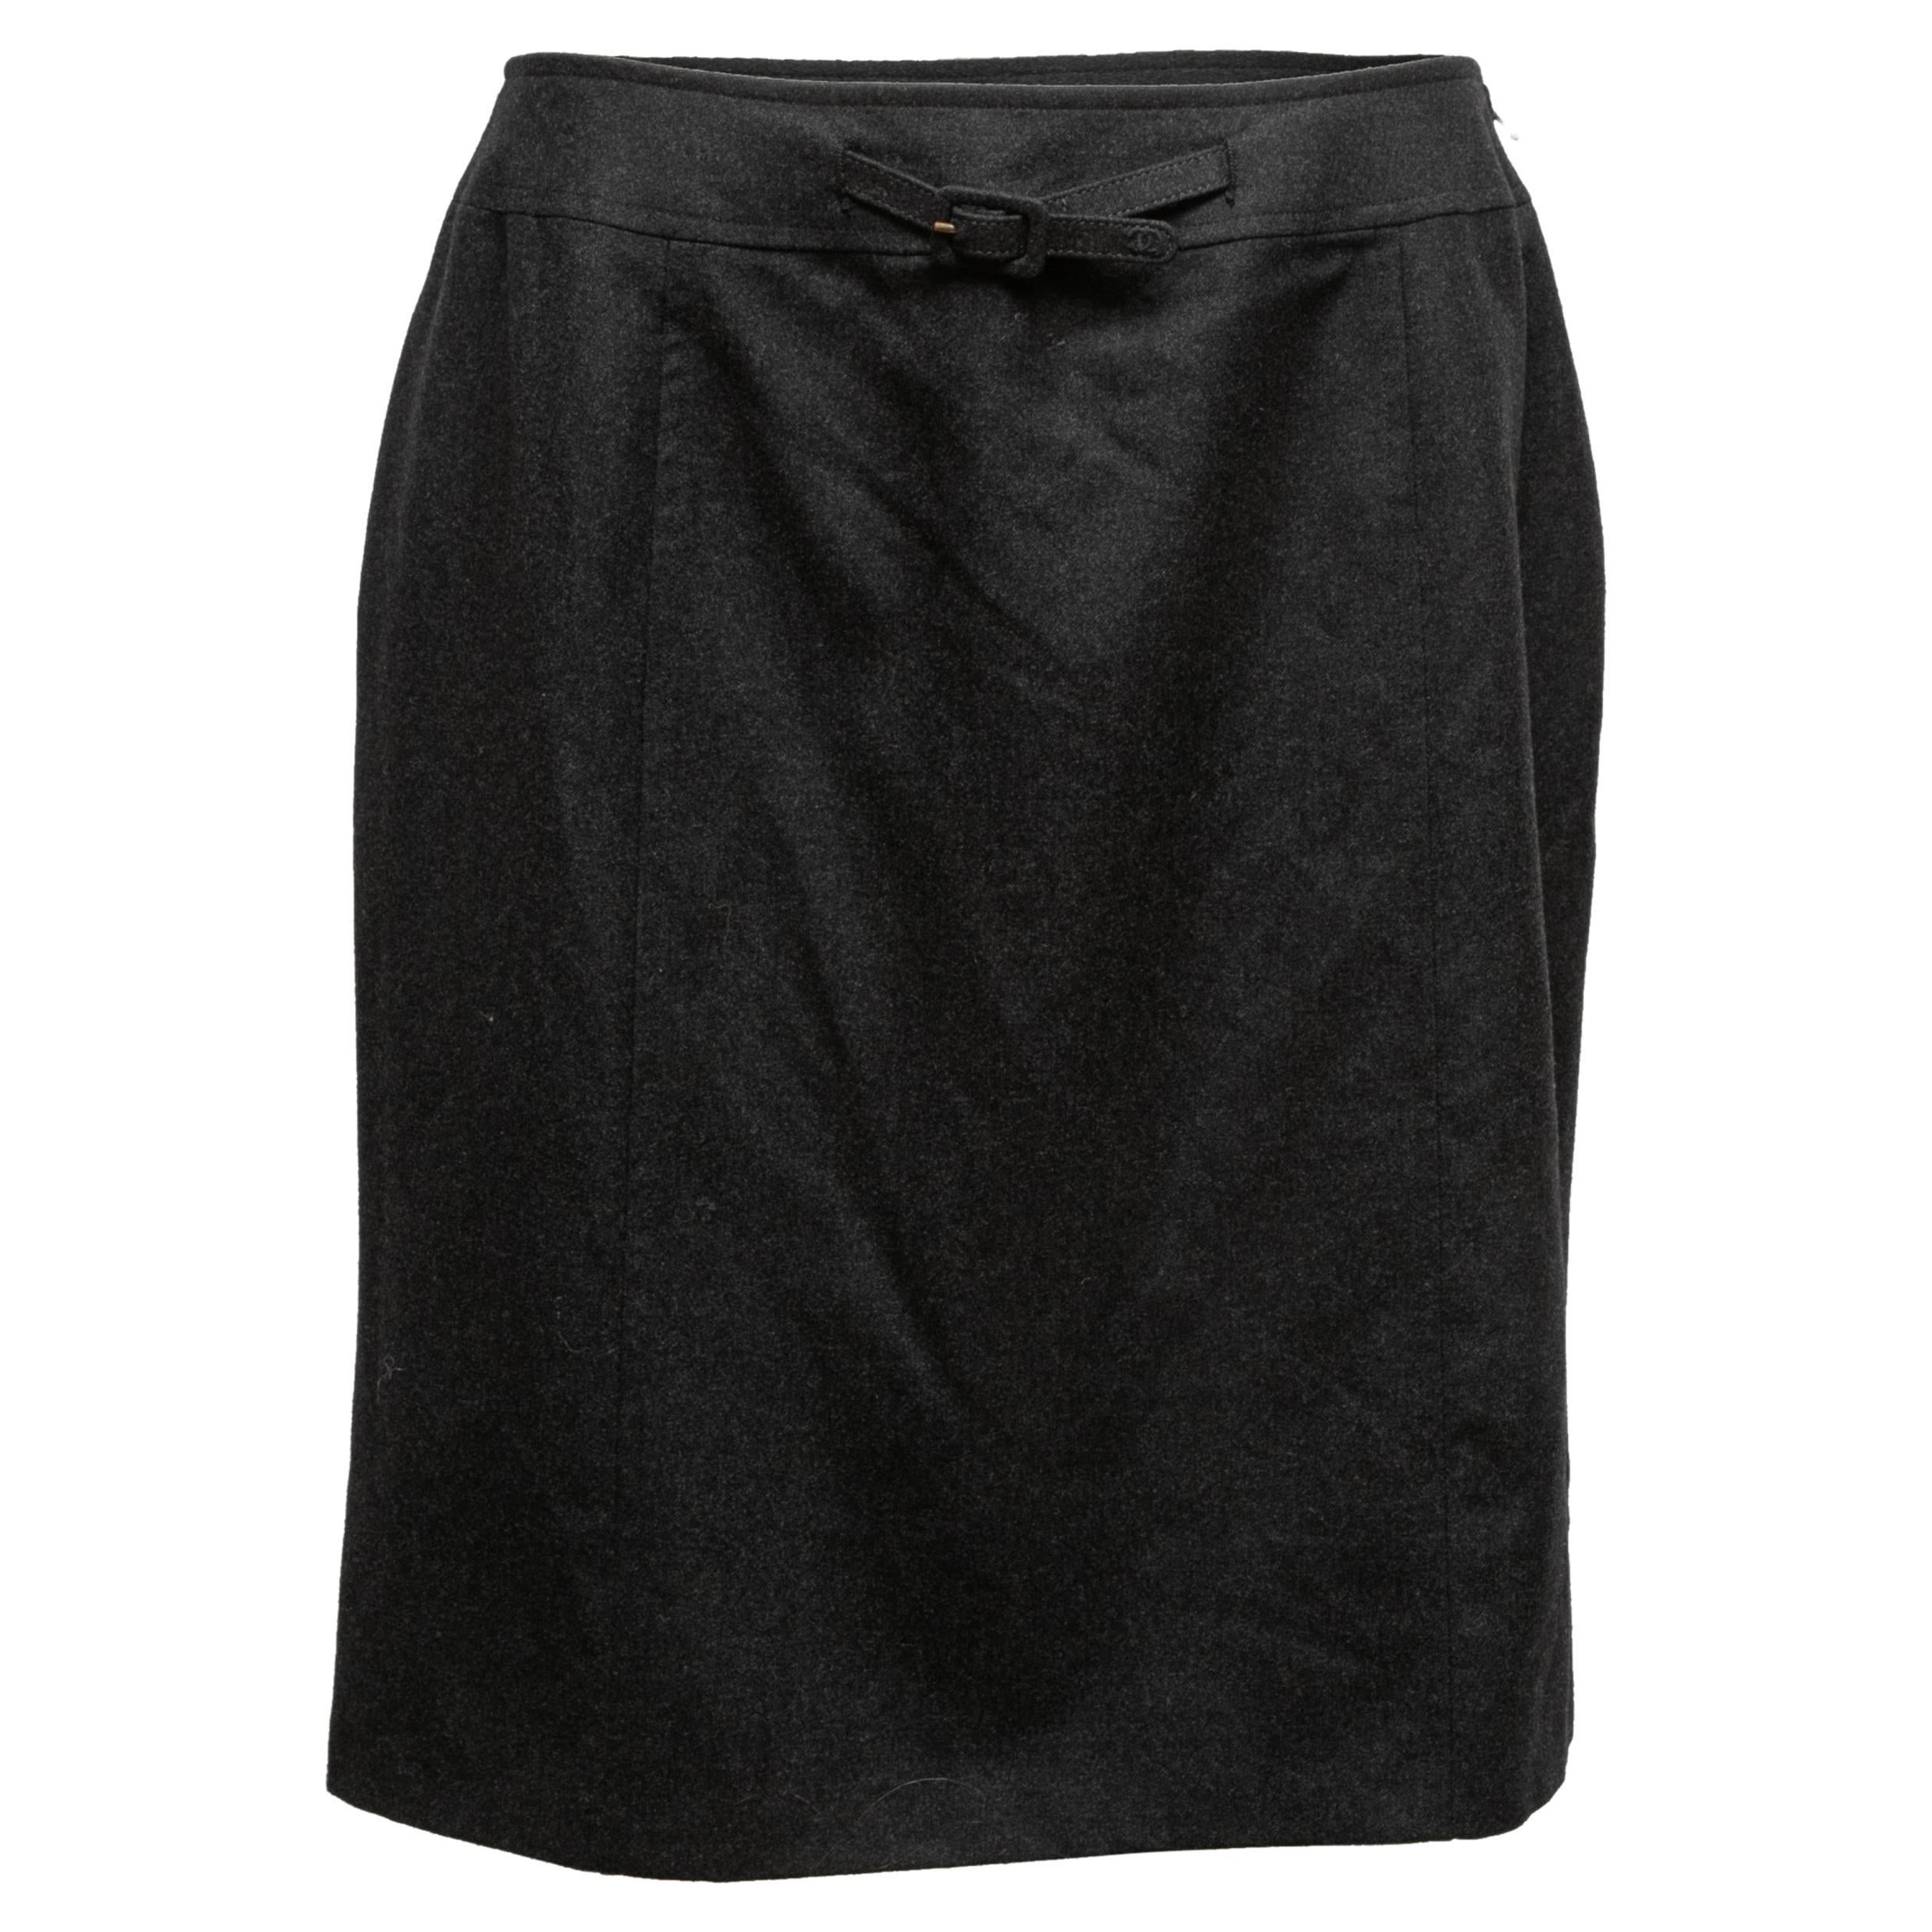 Vintage Charcoal Chanel Fall/Winter 1997 Skirt Size FR 44 For Sale